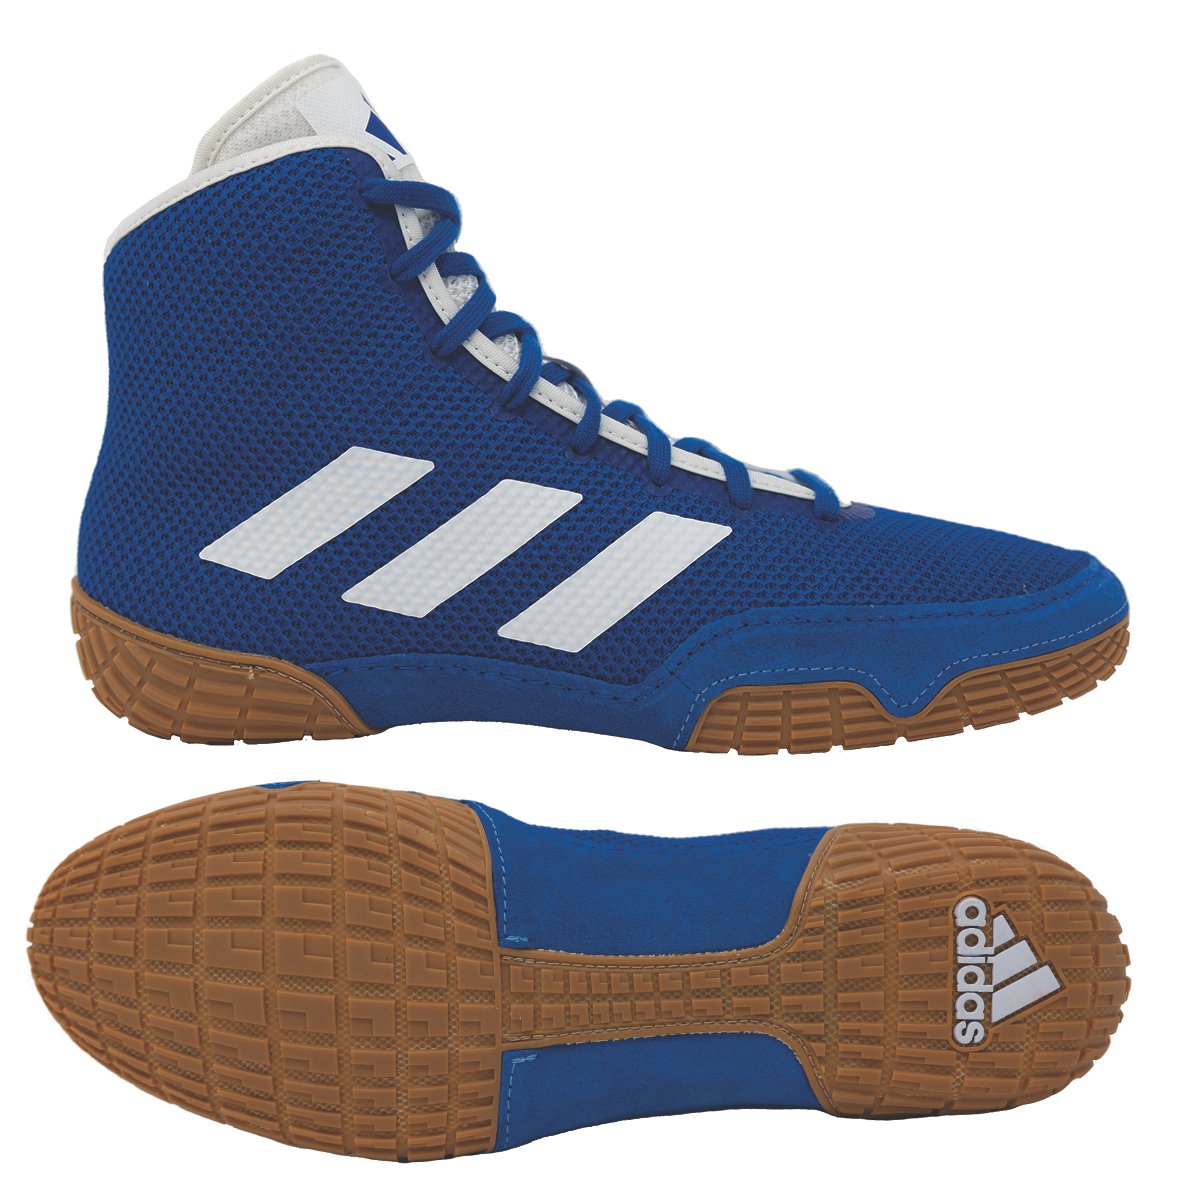 NEW - adidas Tech Fall 2.0 Wrestling Shoe, color: Royal/White